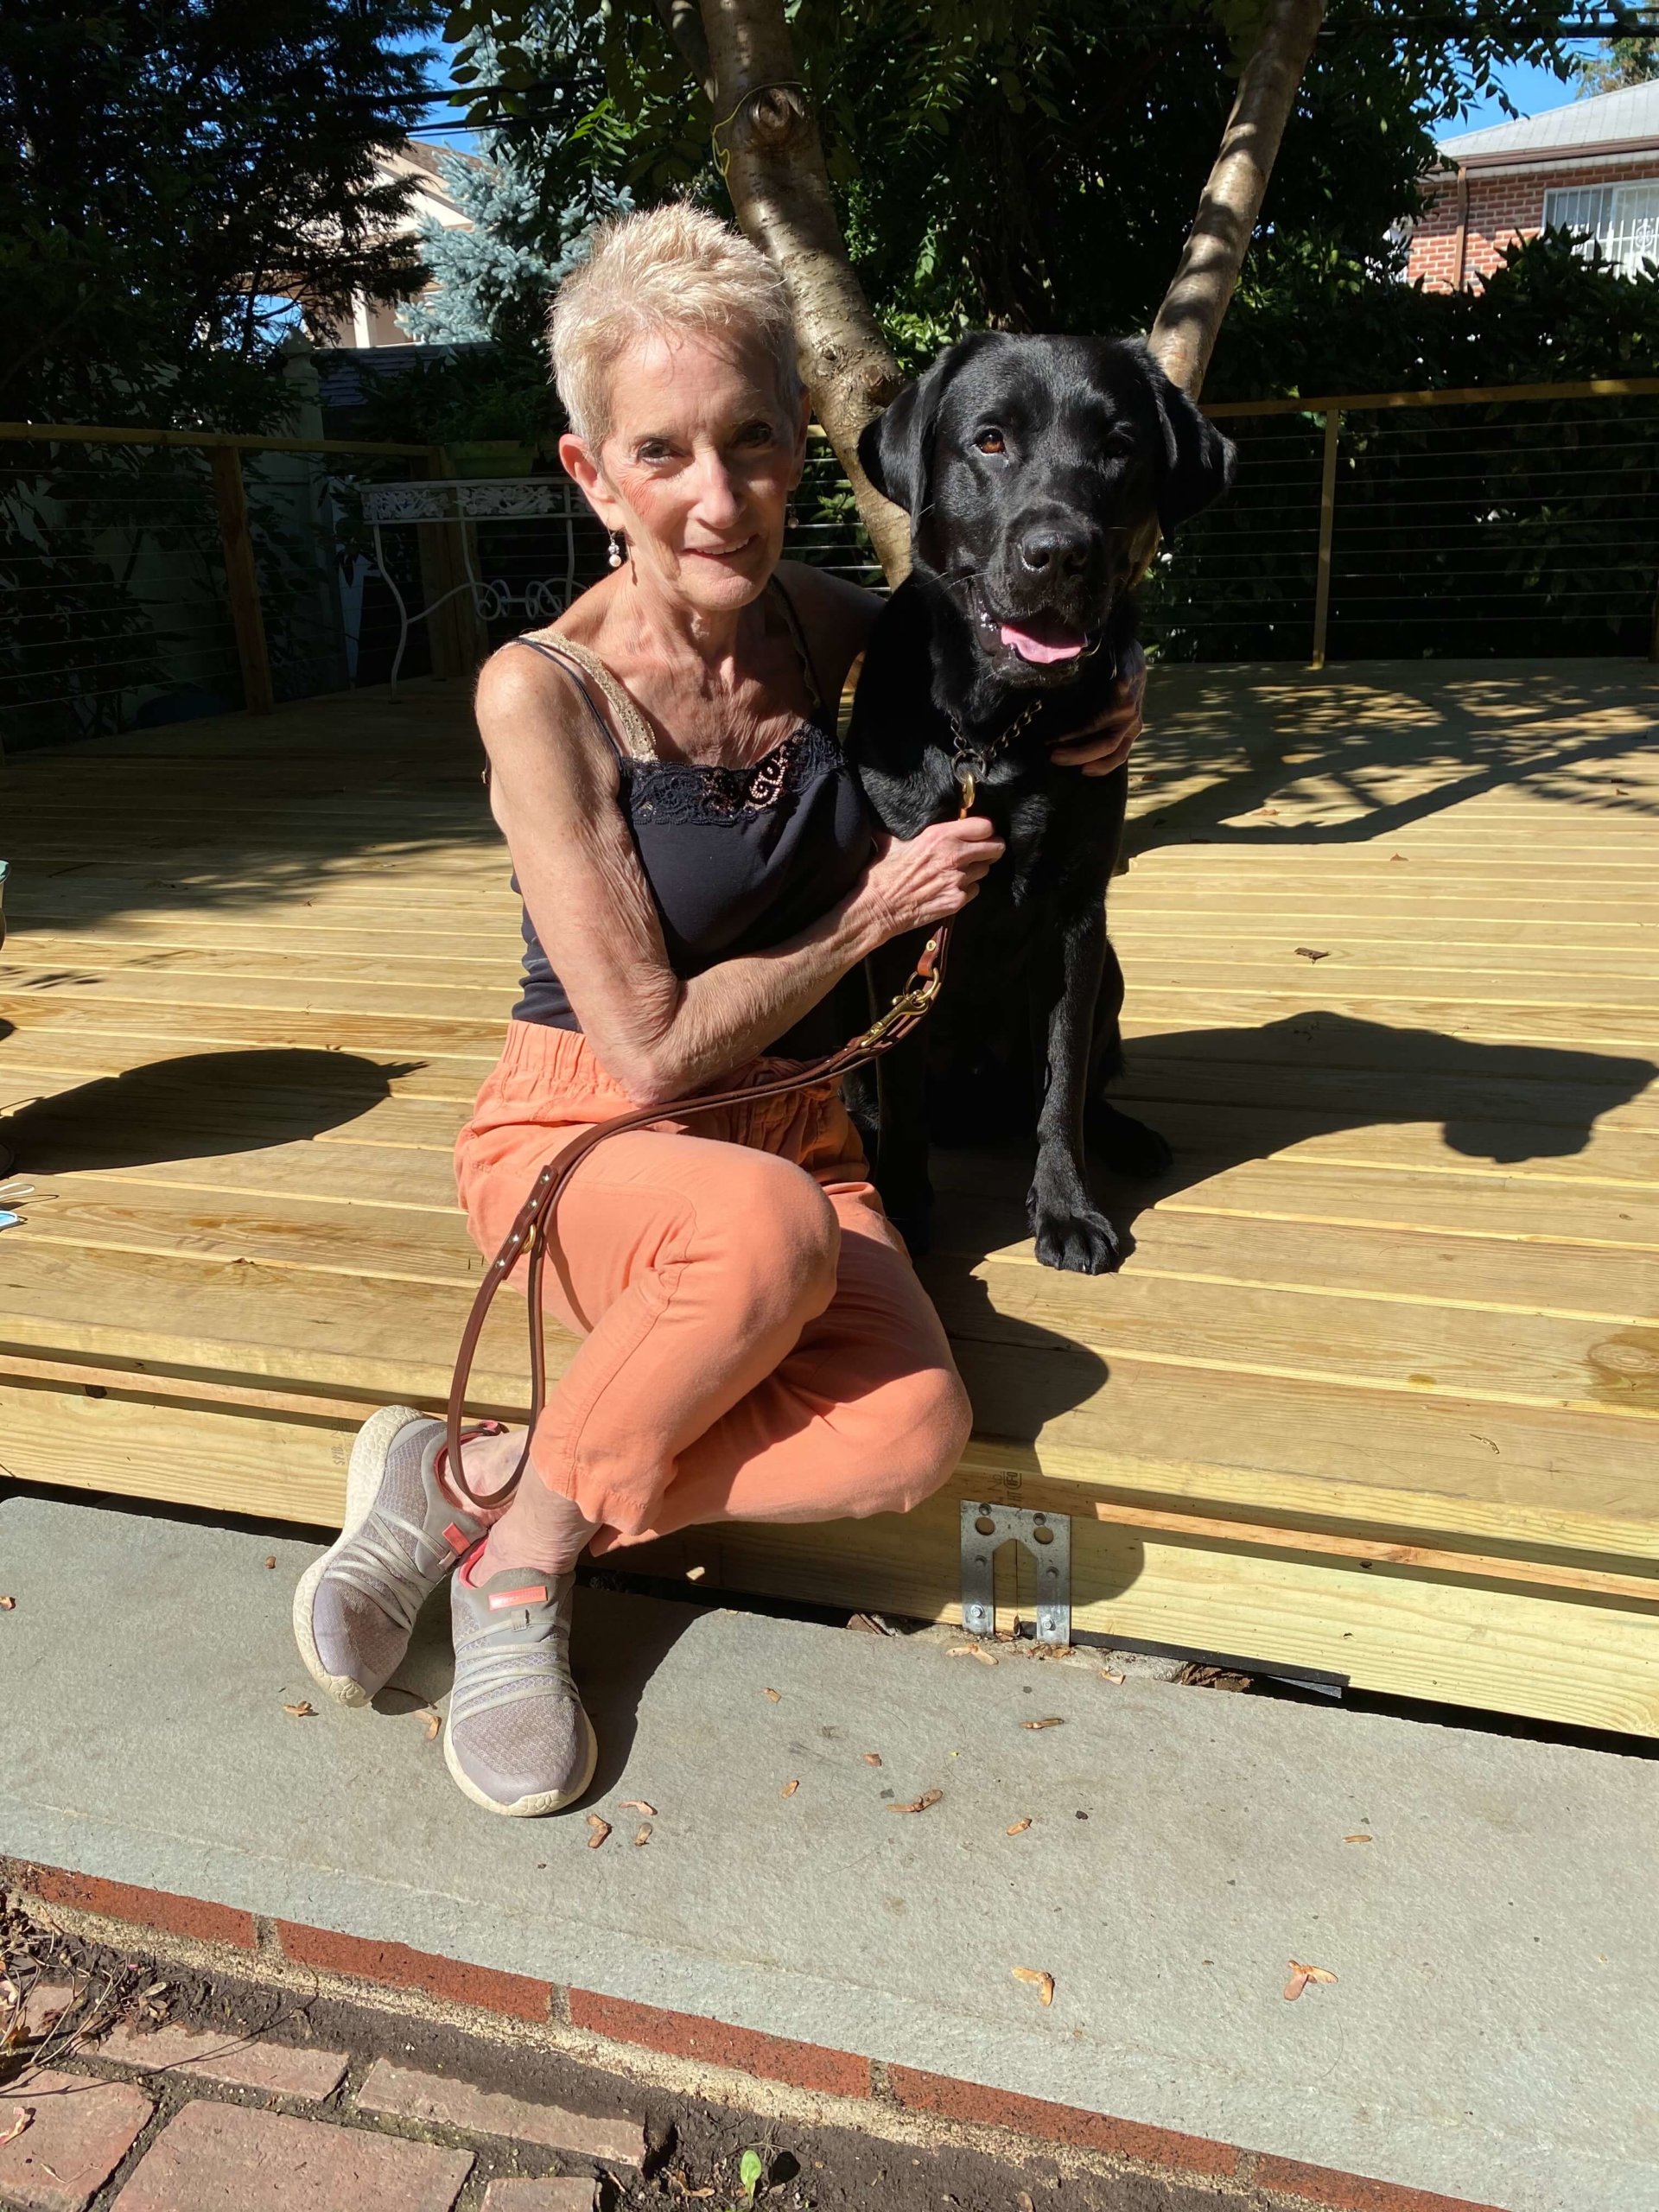 Susan and Oakley pose on wooden decking